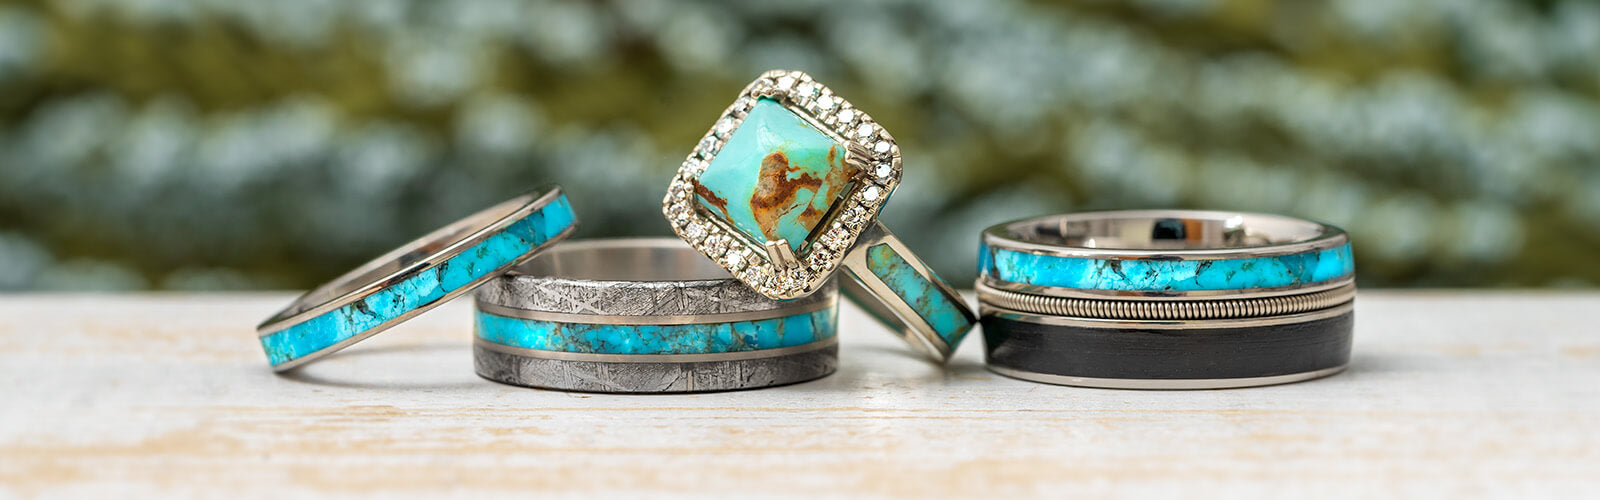 womens turquoise rings - green mountain playboys